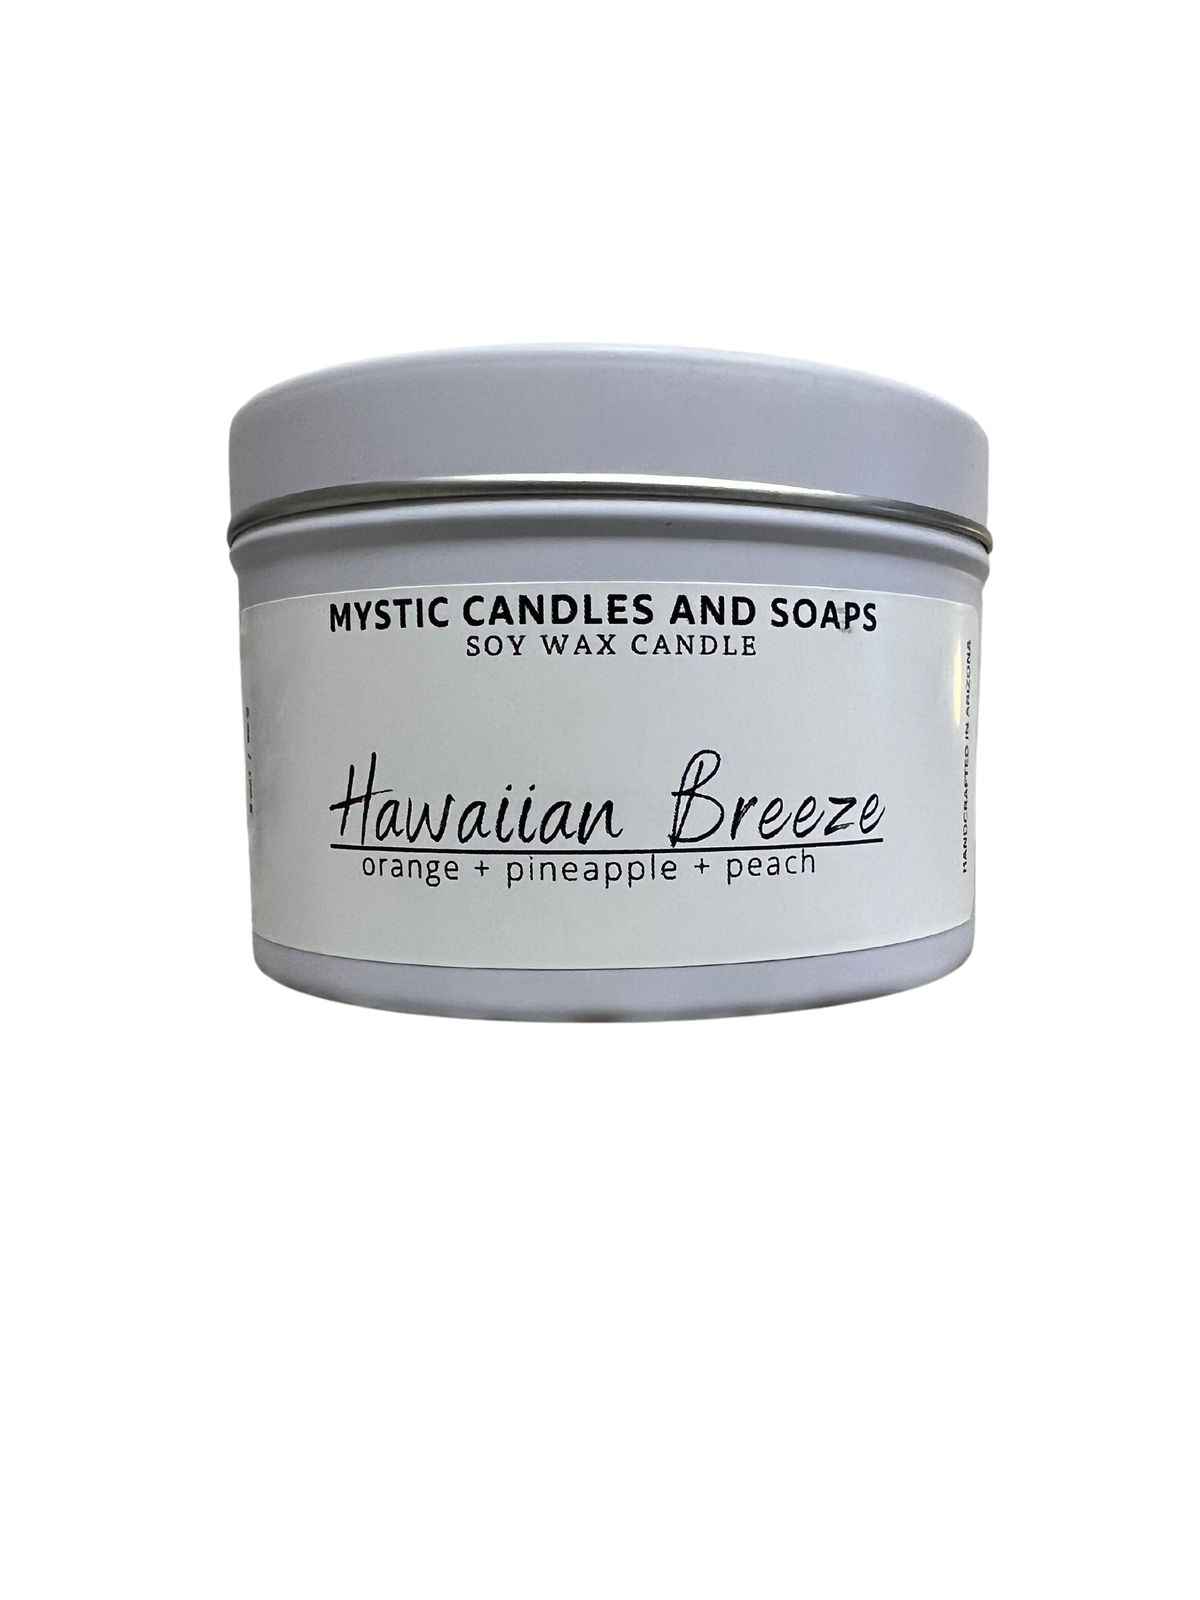 Hawaiian Breeze Flameless Candle - Mystic Candles and Soaps LLC